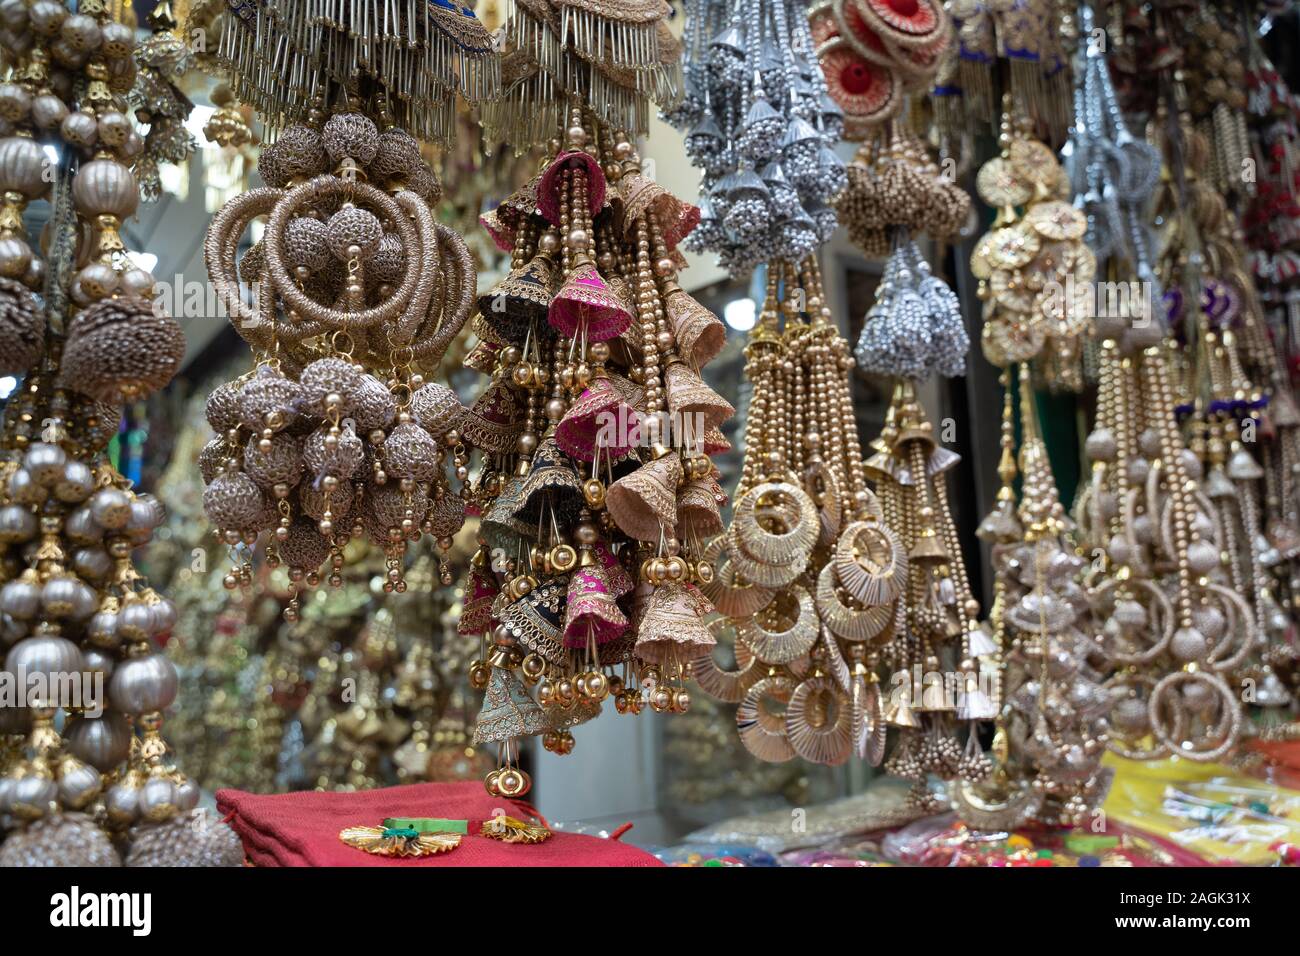 Colorful metallic decorations on display for sale in Chandi Chowk Old Delhi. These flowers, beads and bells designs are popular in weddings, festivals Stock Photo